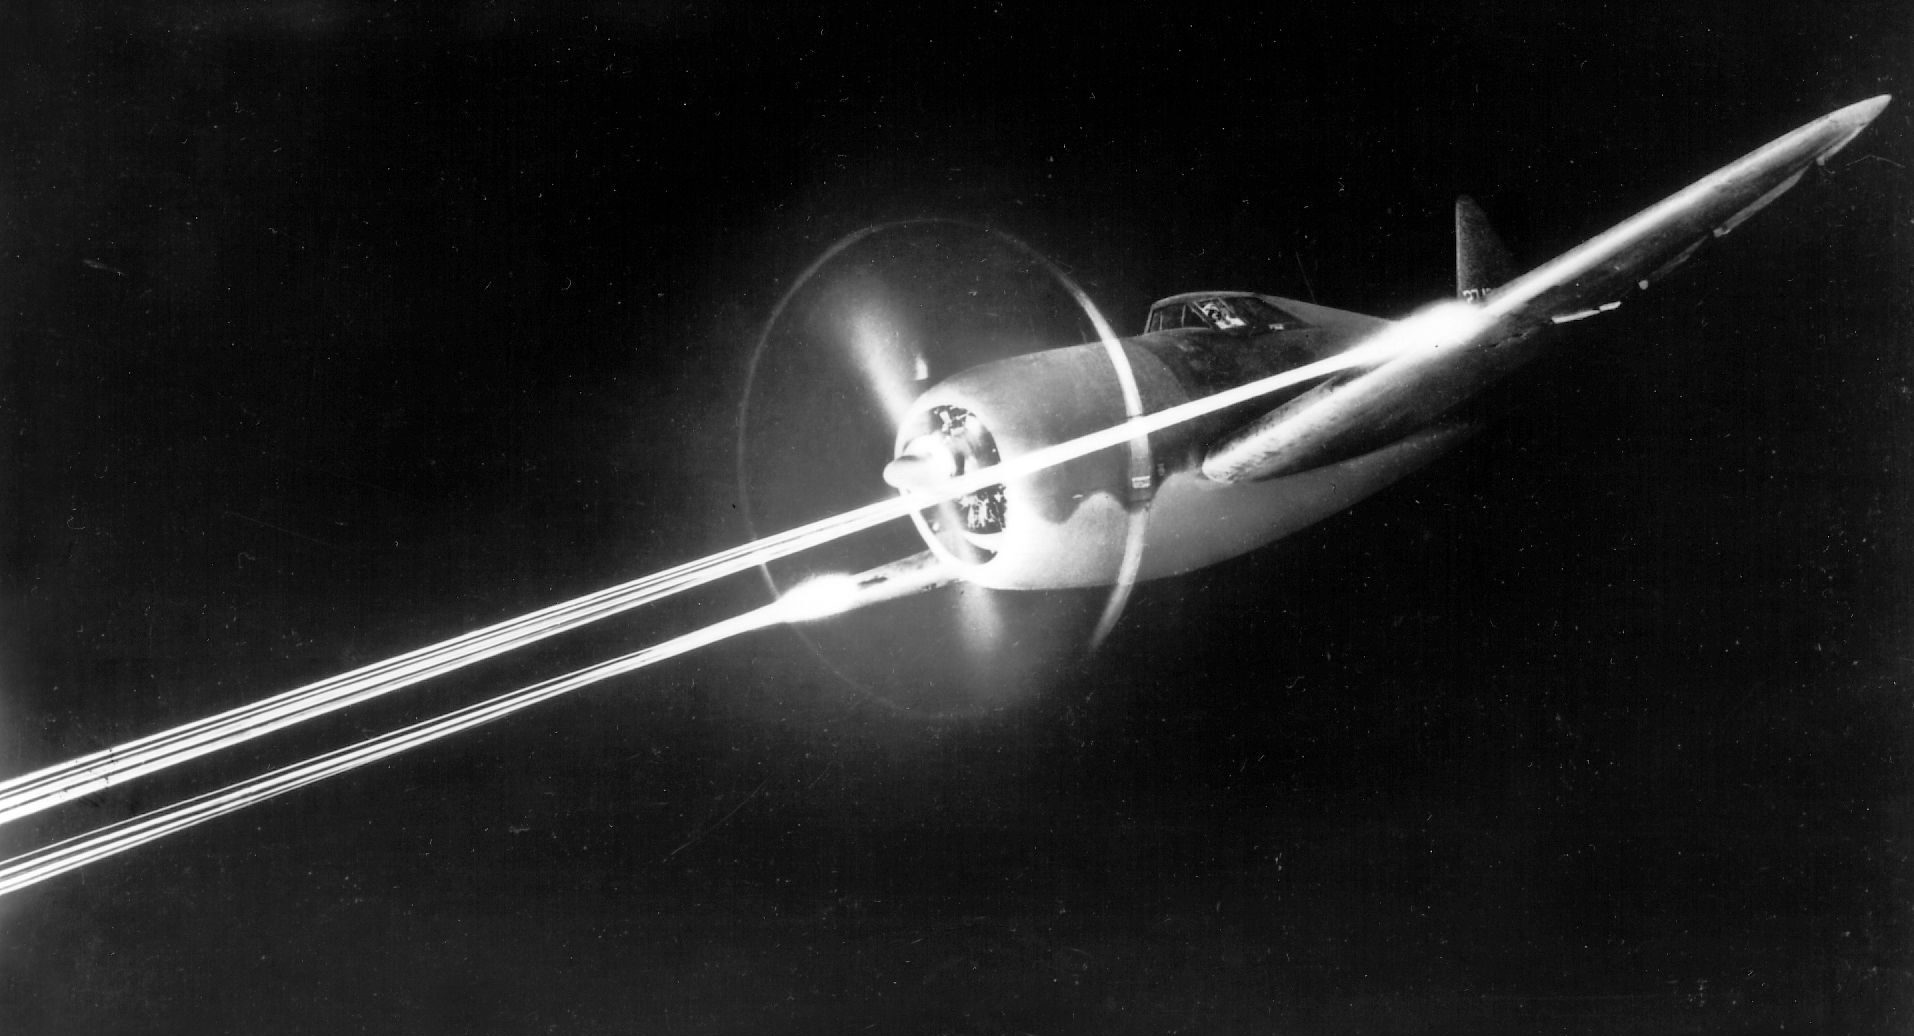 With .50 machine guns blazing, a P-47 takes part in night gunnery practice. Used as both a high-altitude escort fighter and a low-level fighter-bomber, the P-47 quickly gained a reputation for ruggedness. Its sturdy construction and air-cooled radial engine enabled the Thunderbolt to absorb severe battle damage and keep flying.